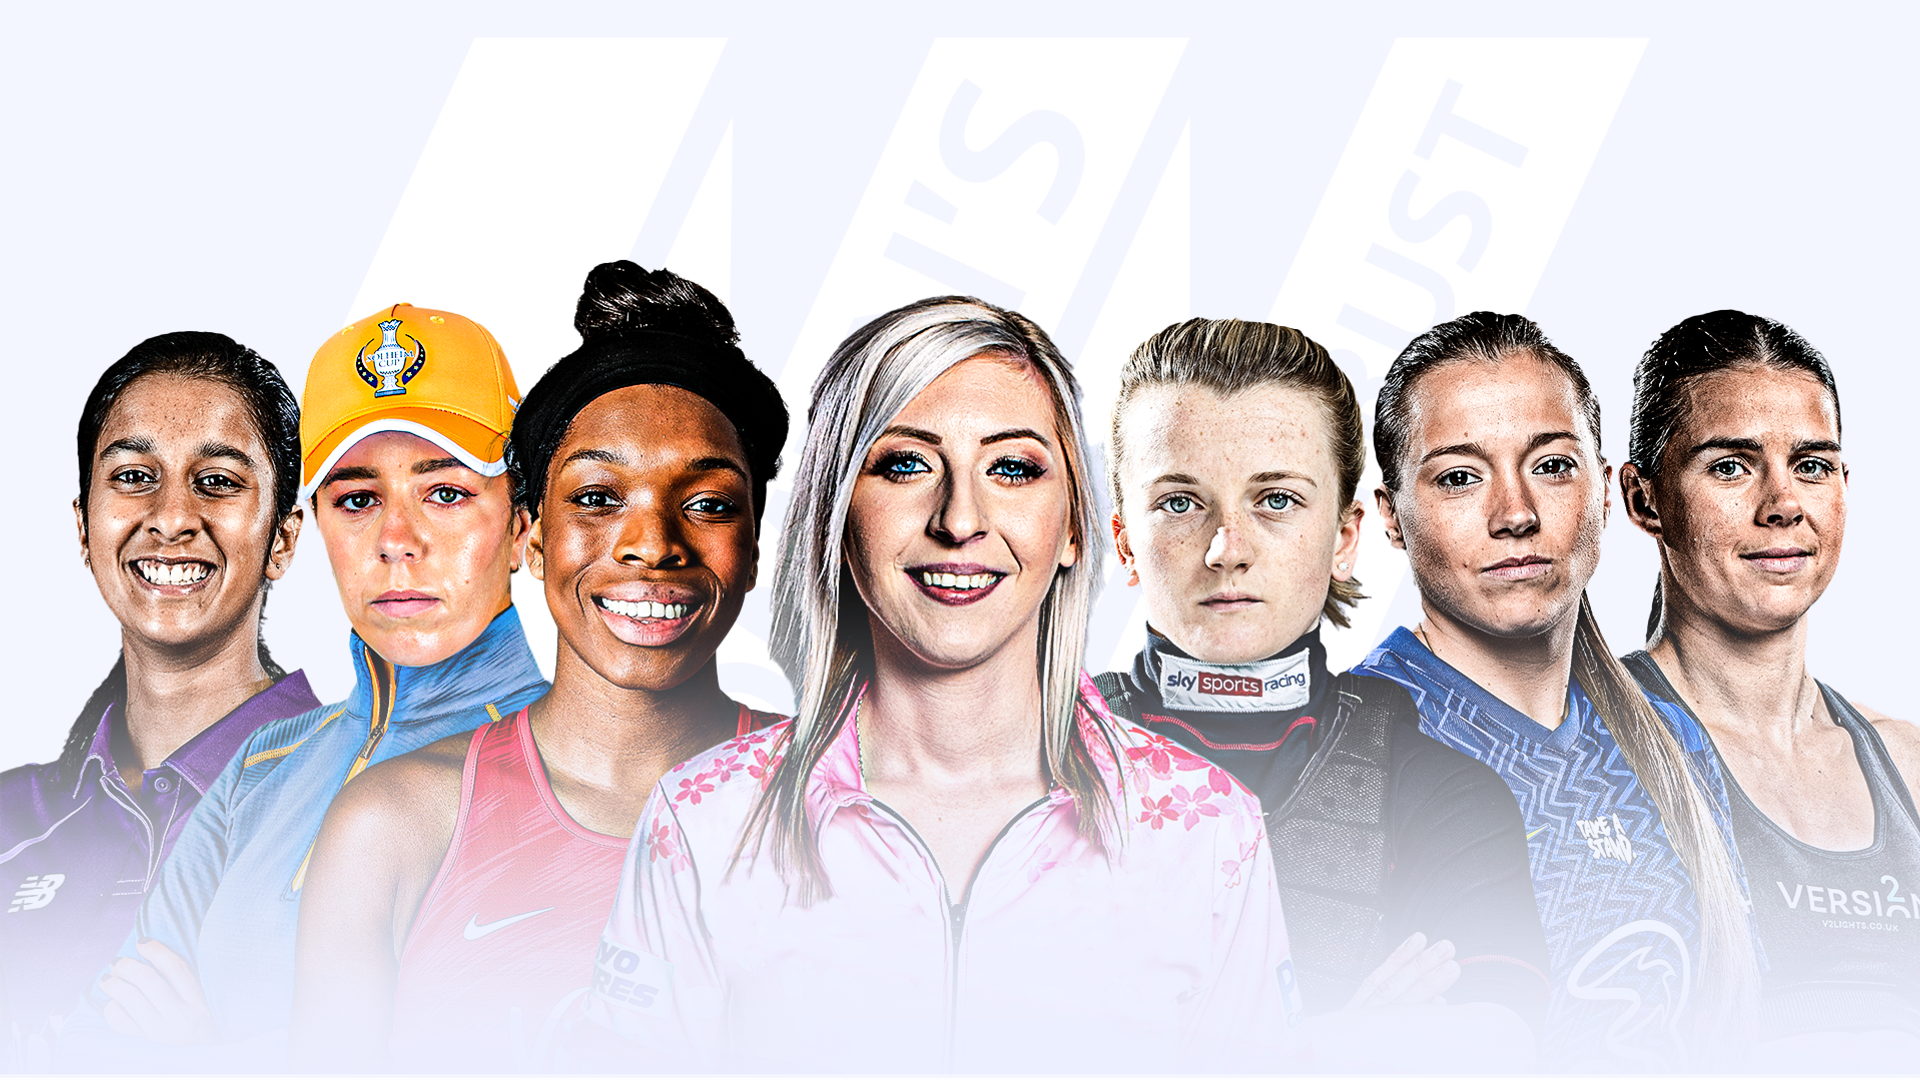 Record-breaking 15.1m watched women’s sport in first three months of 2022SkySports | News